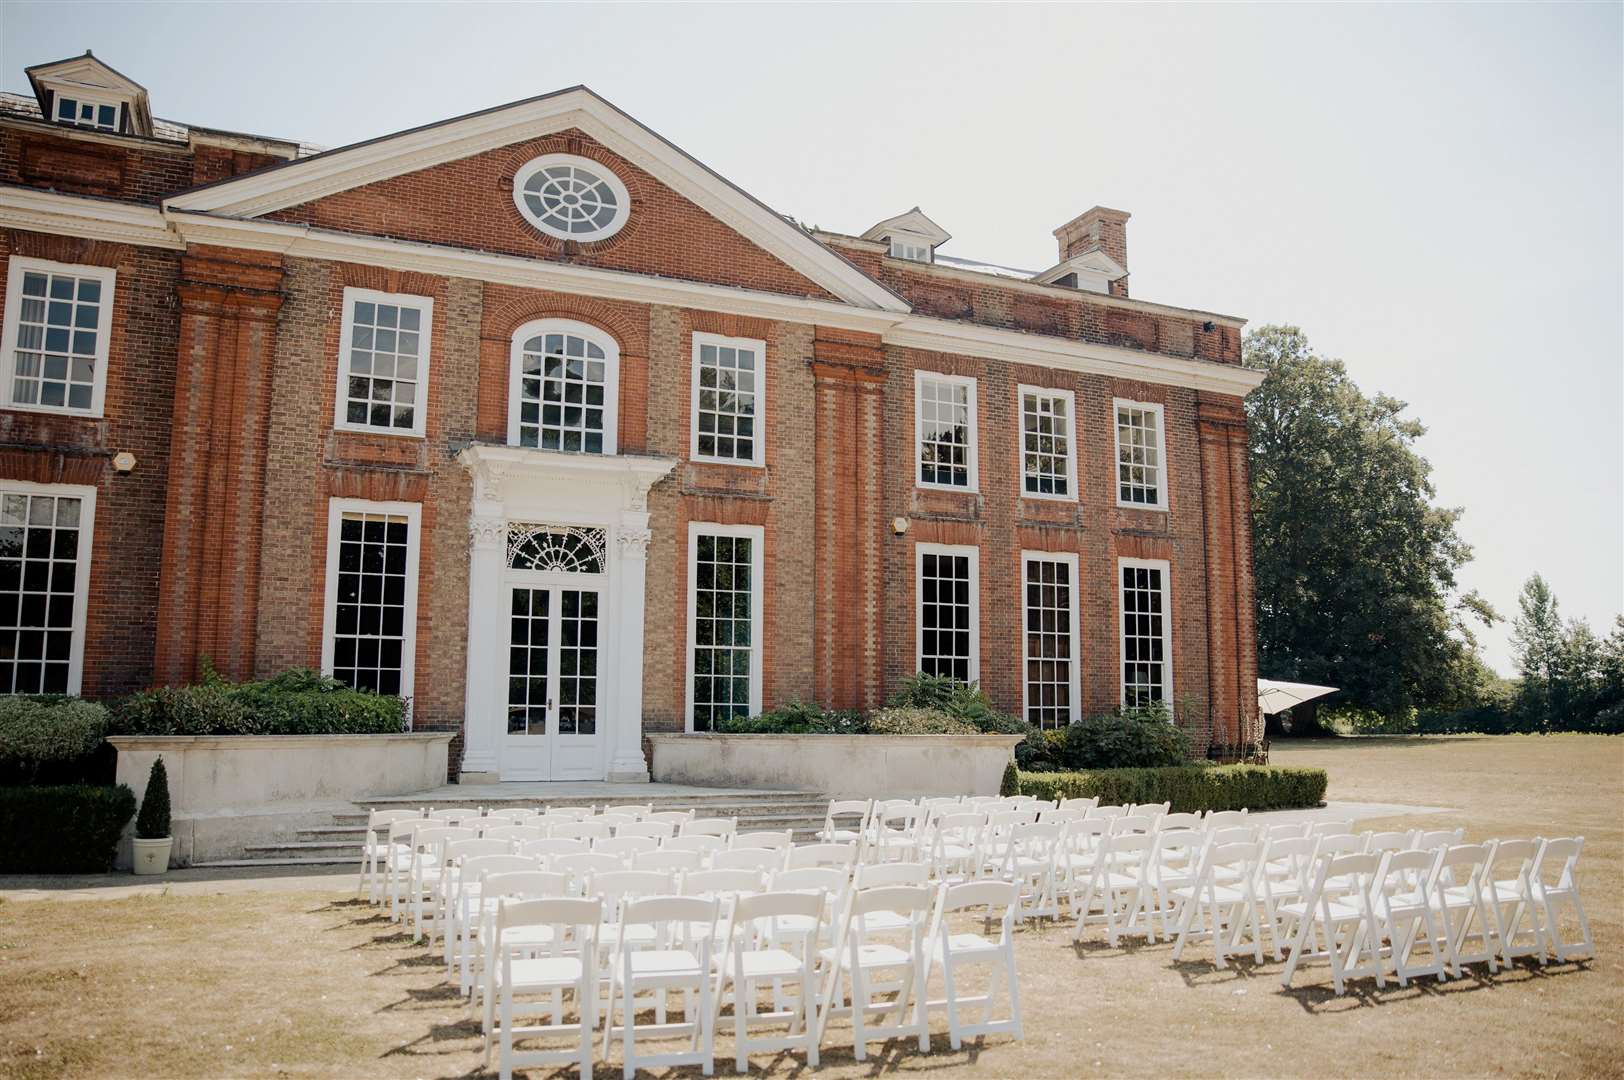 Bradbourne House in New Road, East Malling, has won Heritage Wedding Venue of the Year. Picture: Bradbourne House